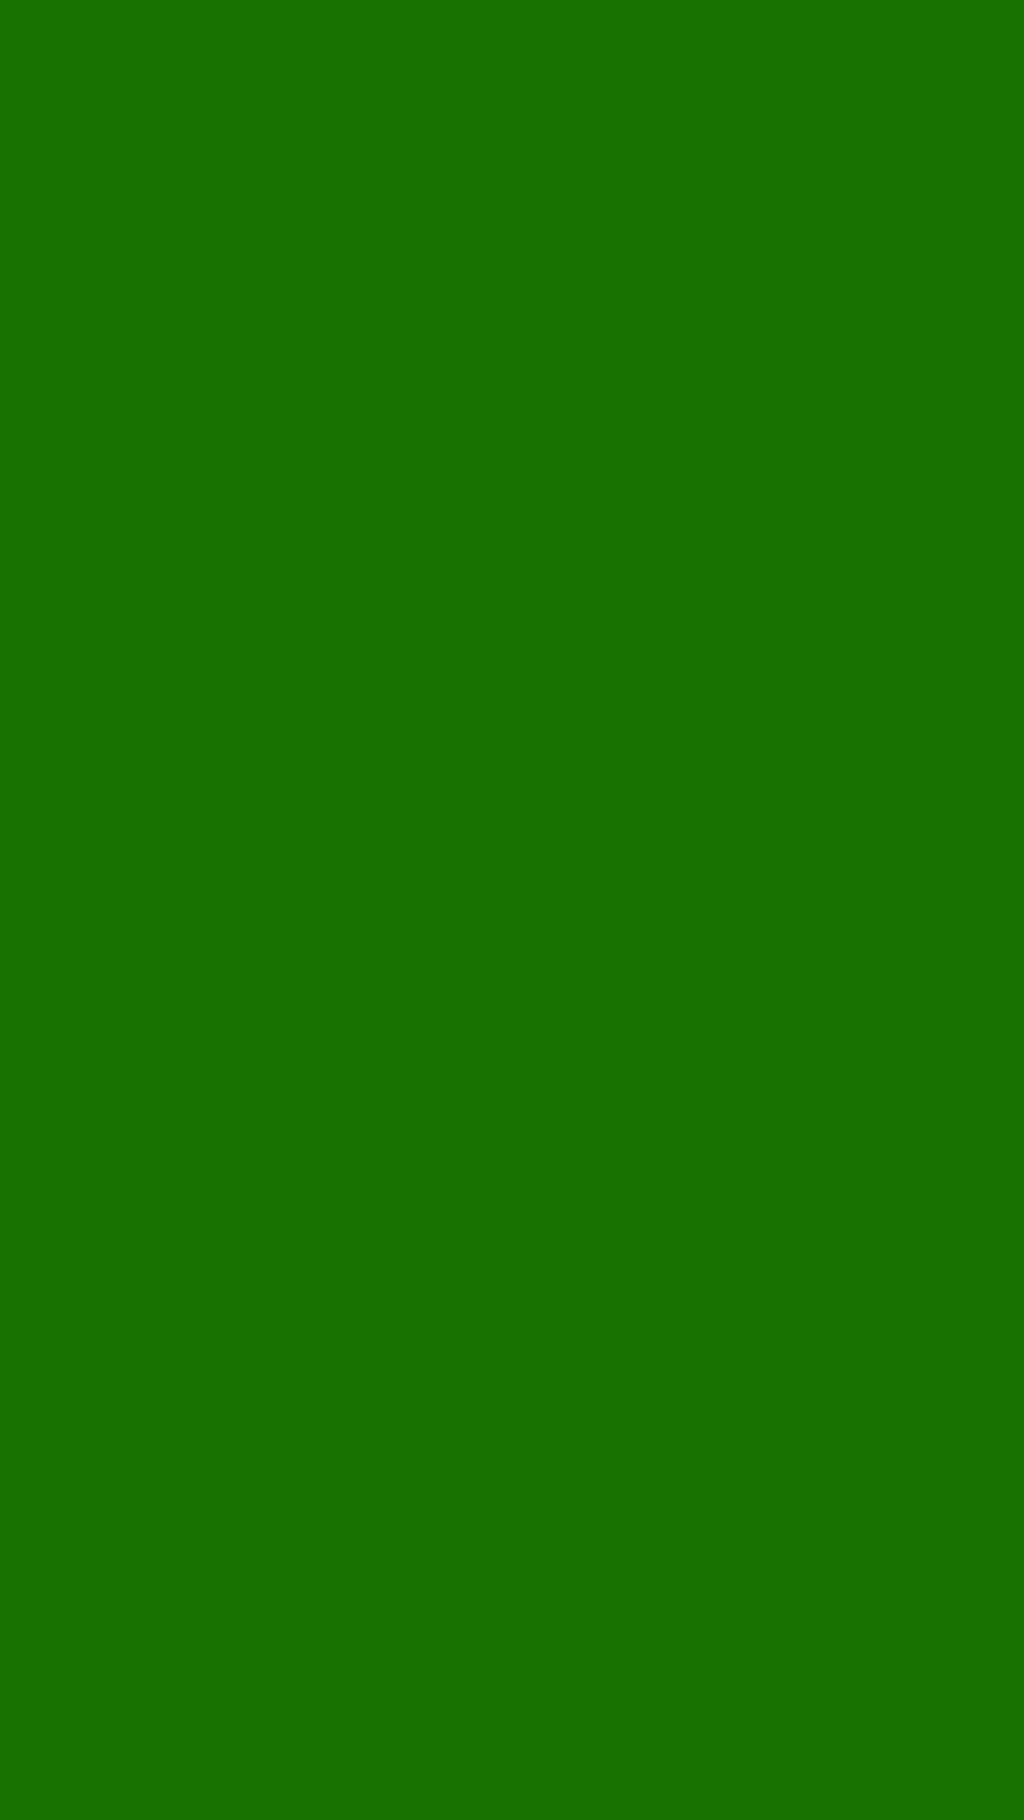 Captivating Green Solid Background Wallpaper